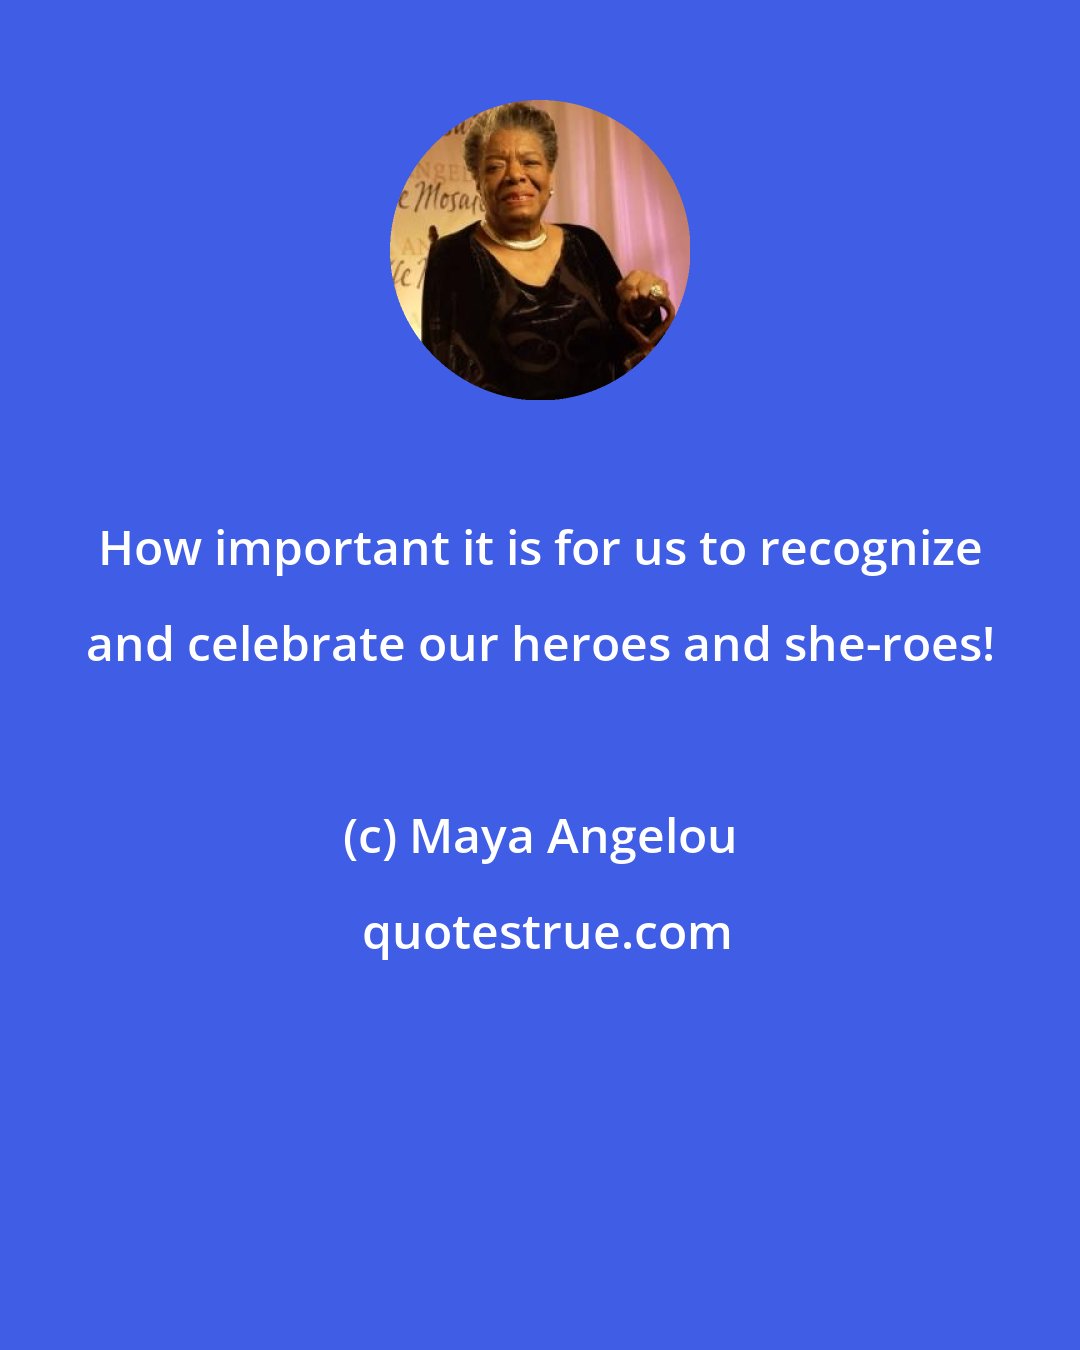 Maya Angelou: How important it is for us to recognize and celebrate our heroes and she-roes!